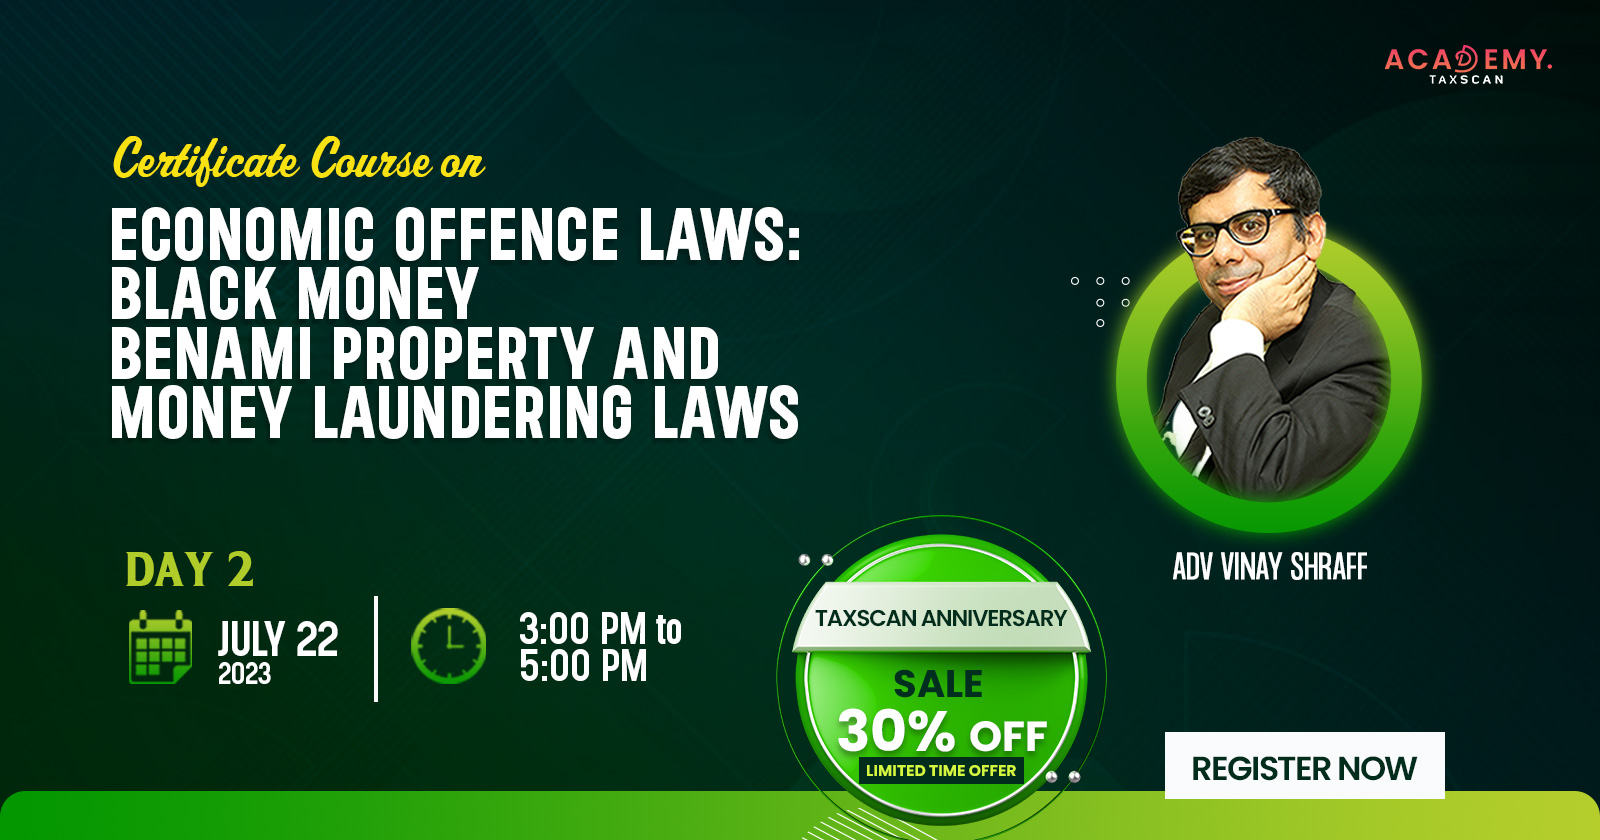 Course on Economic Offence Laws - Economic Offence Laws - Offence Laws- Unraveling Black Money - Benami Property - Money Laundering Laws - taxscan academy